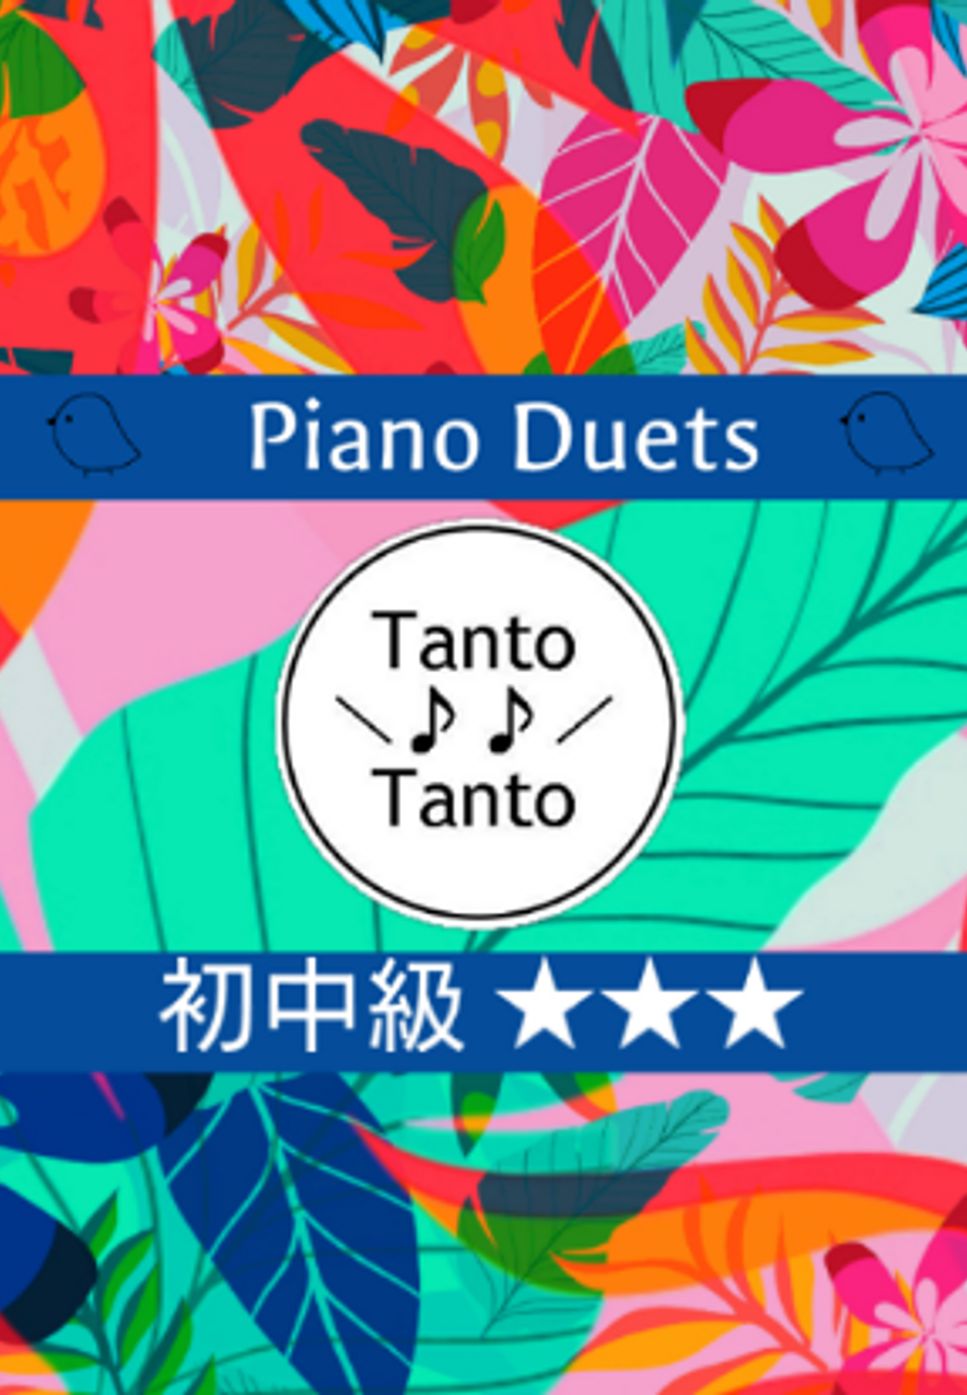 Groovy ゆかいな牧場 Old MacDonald Had a Farm (初中級 3手連弾 Piano Duets 3Hands & Solo 兼用 in F) by Tanto Tanto